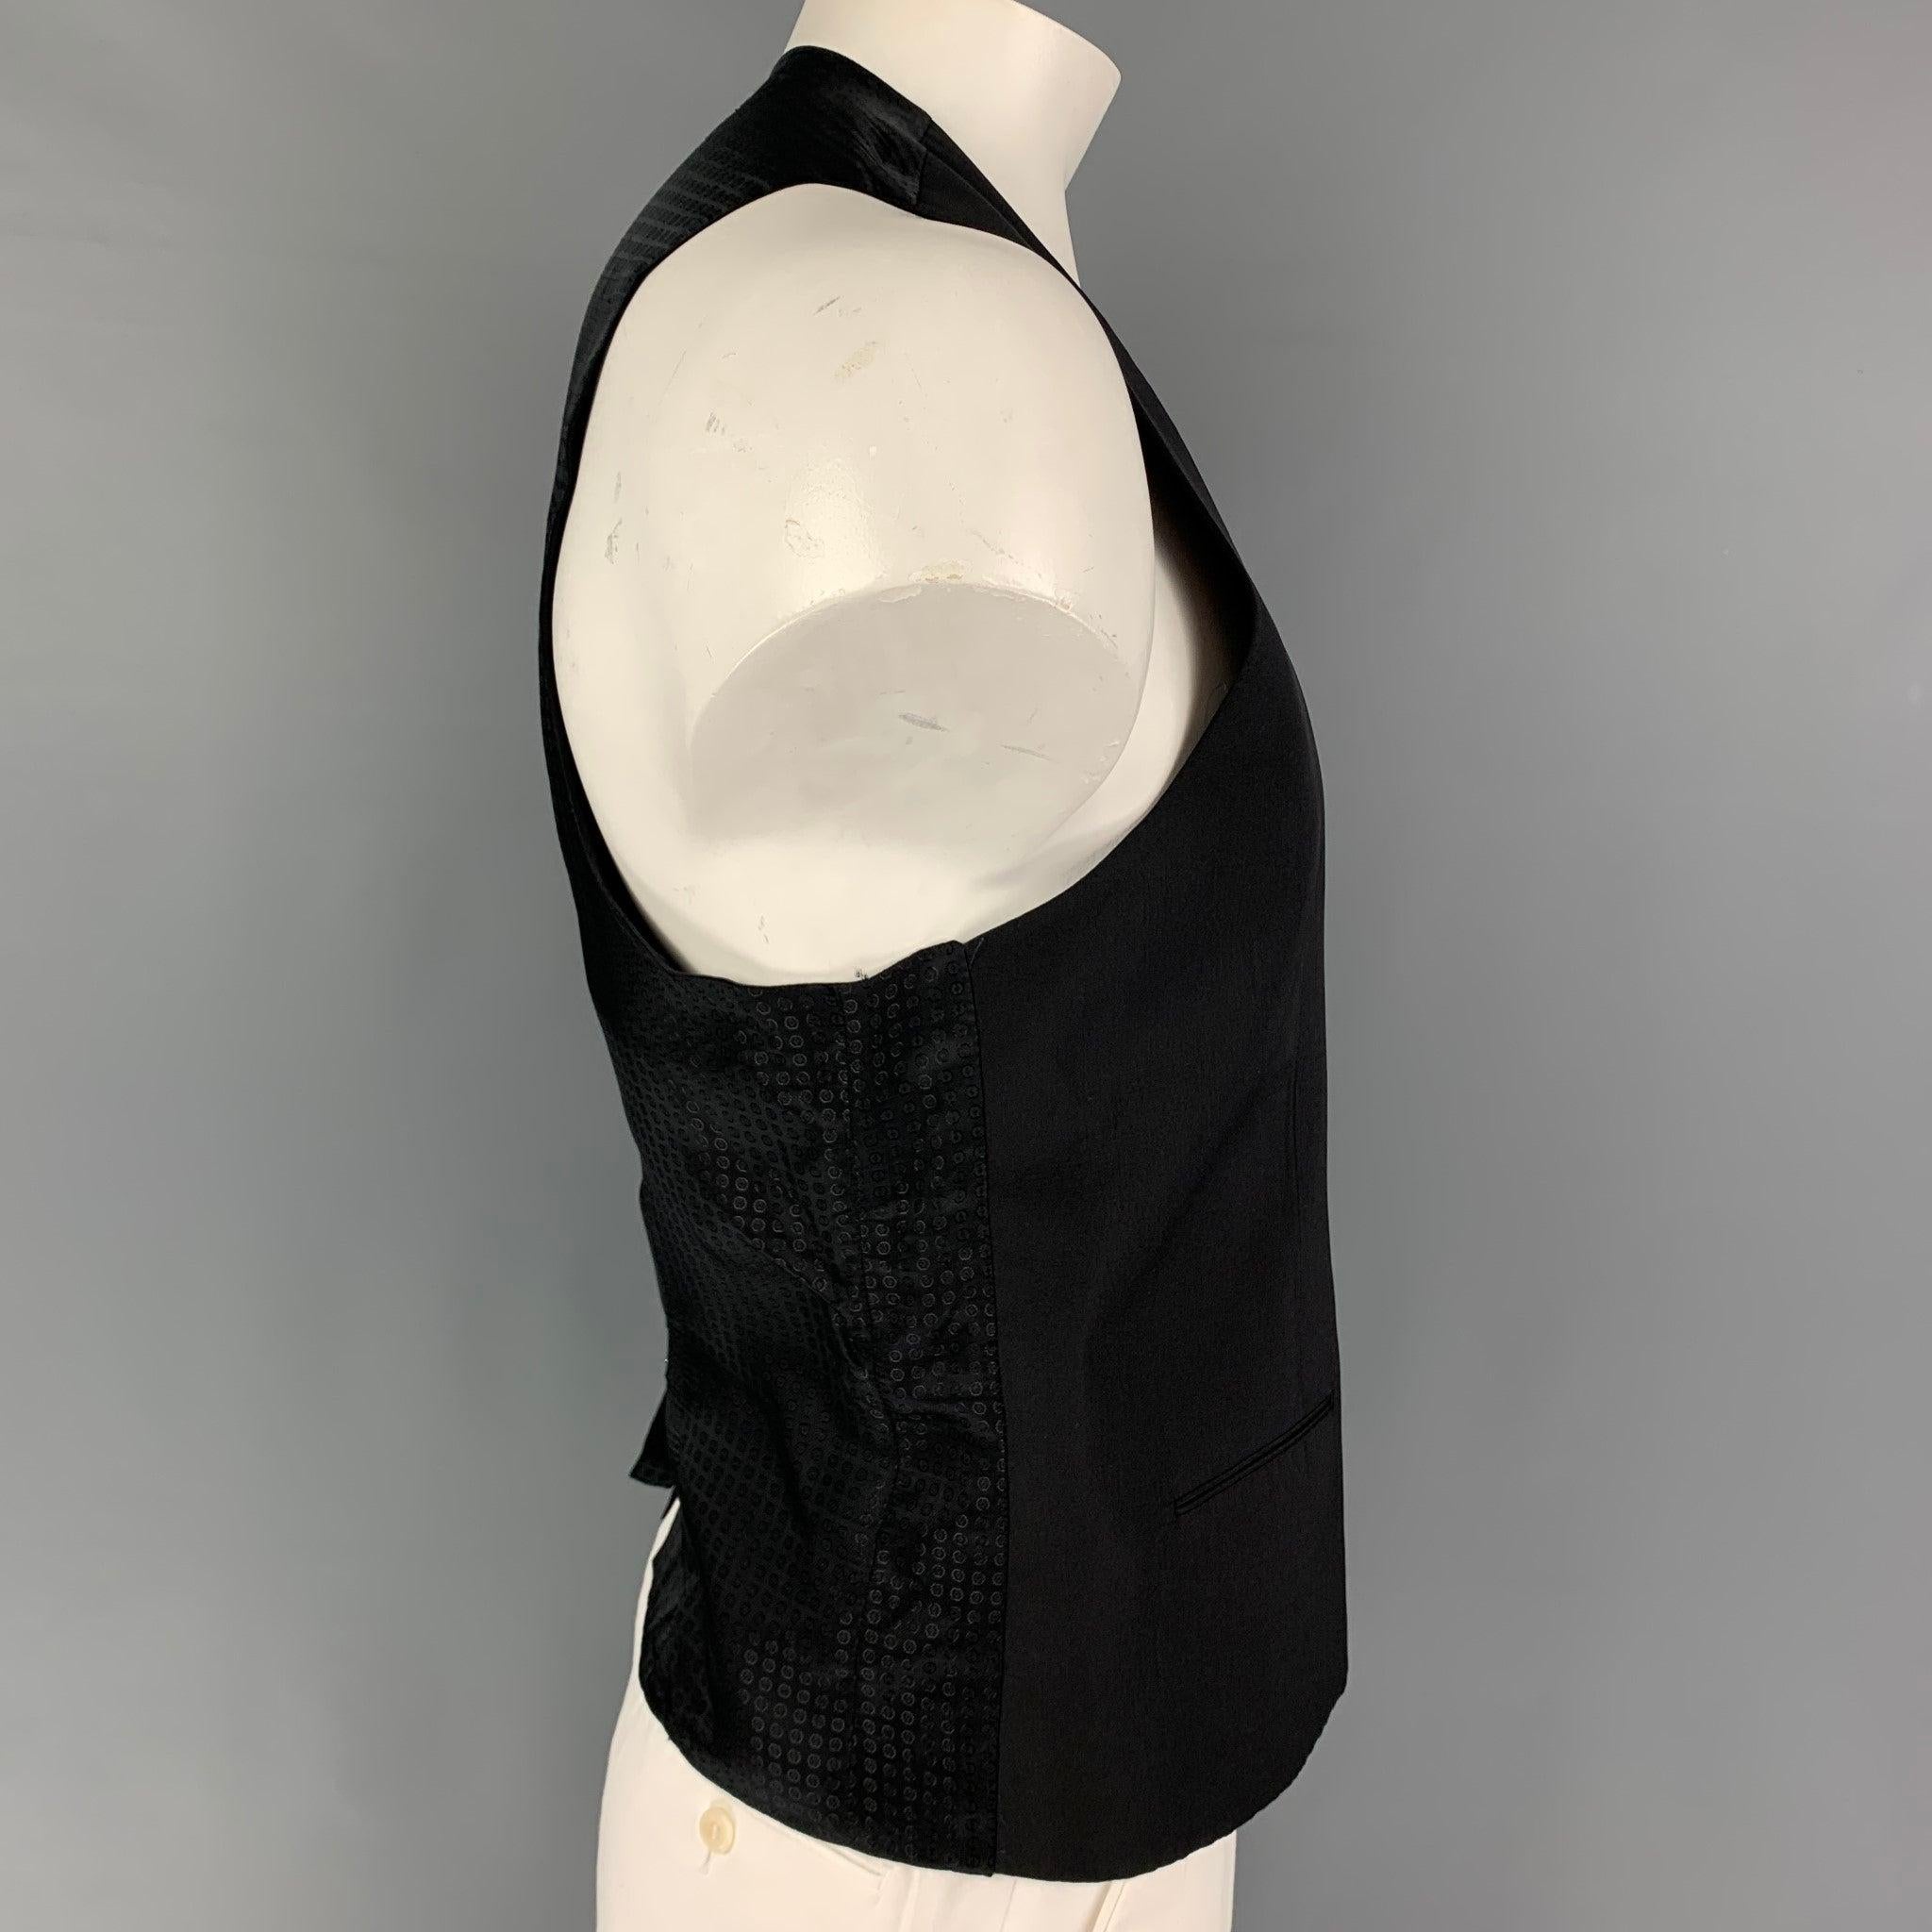 DOLCE & GABBANA vest comes in a black wool / silk featuring a back belt, slit pockets, and a buttoned closure. Made in Italy.
Very Good
Pre-Owned Condition. 

Marked:   56 

Measurements: 
 
Shoulder: 15.5 inches  Chest: 46 inches  Length: 25 inches